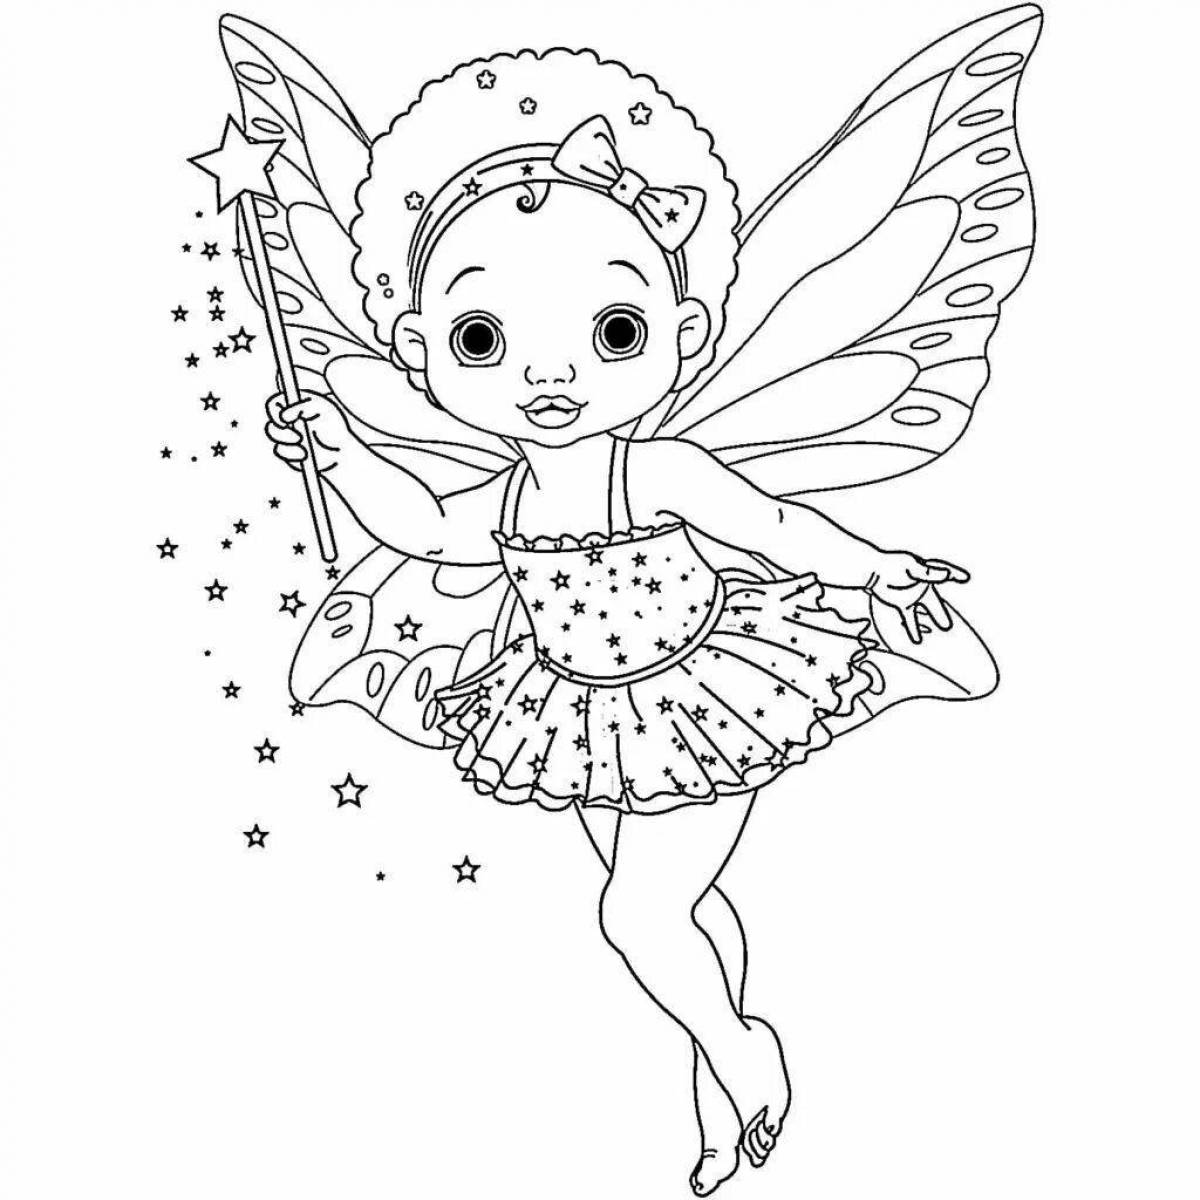 Fairy tooth live coloring for kids